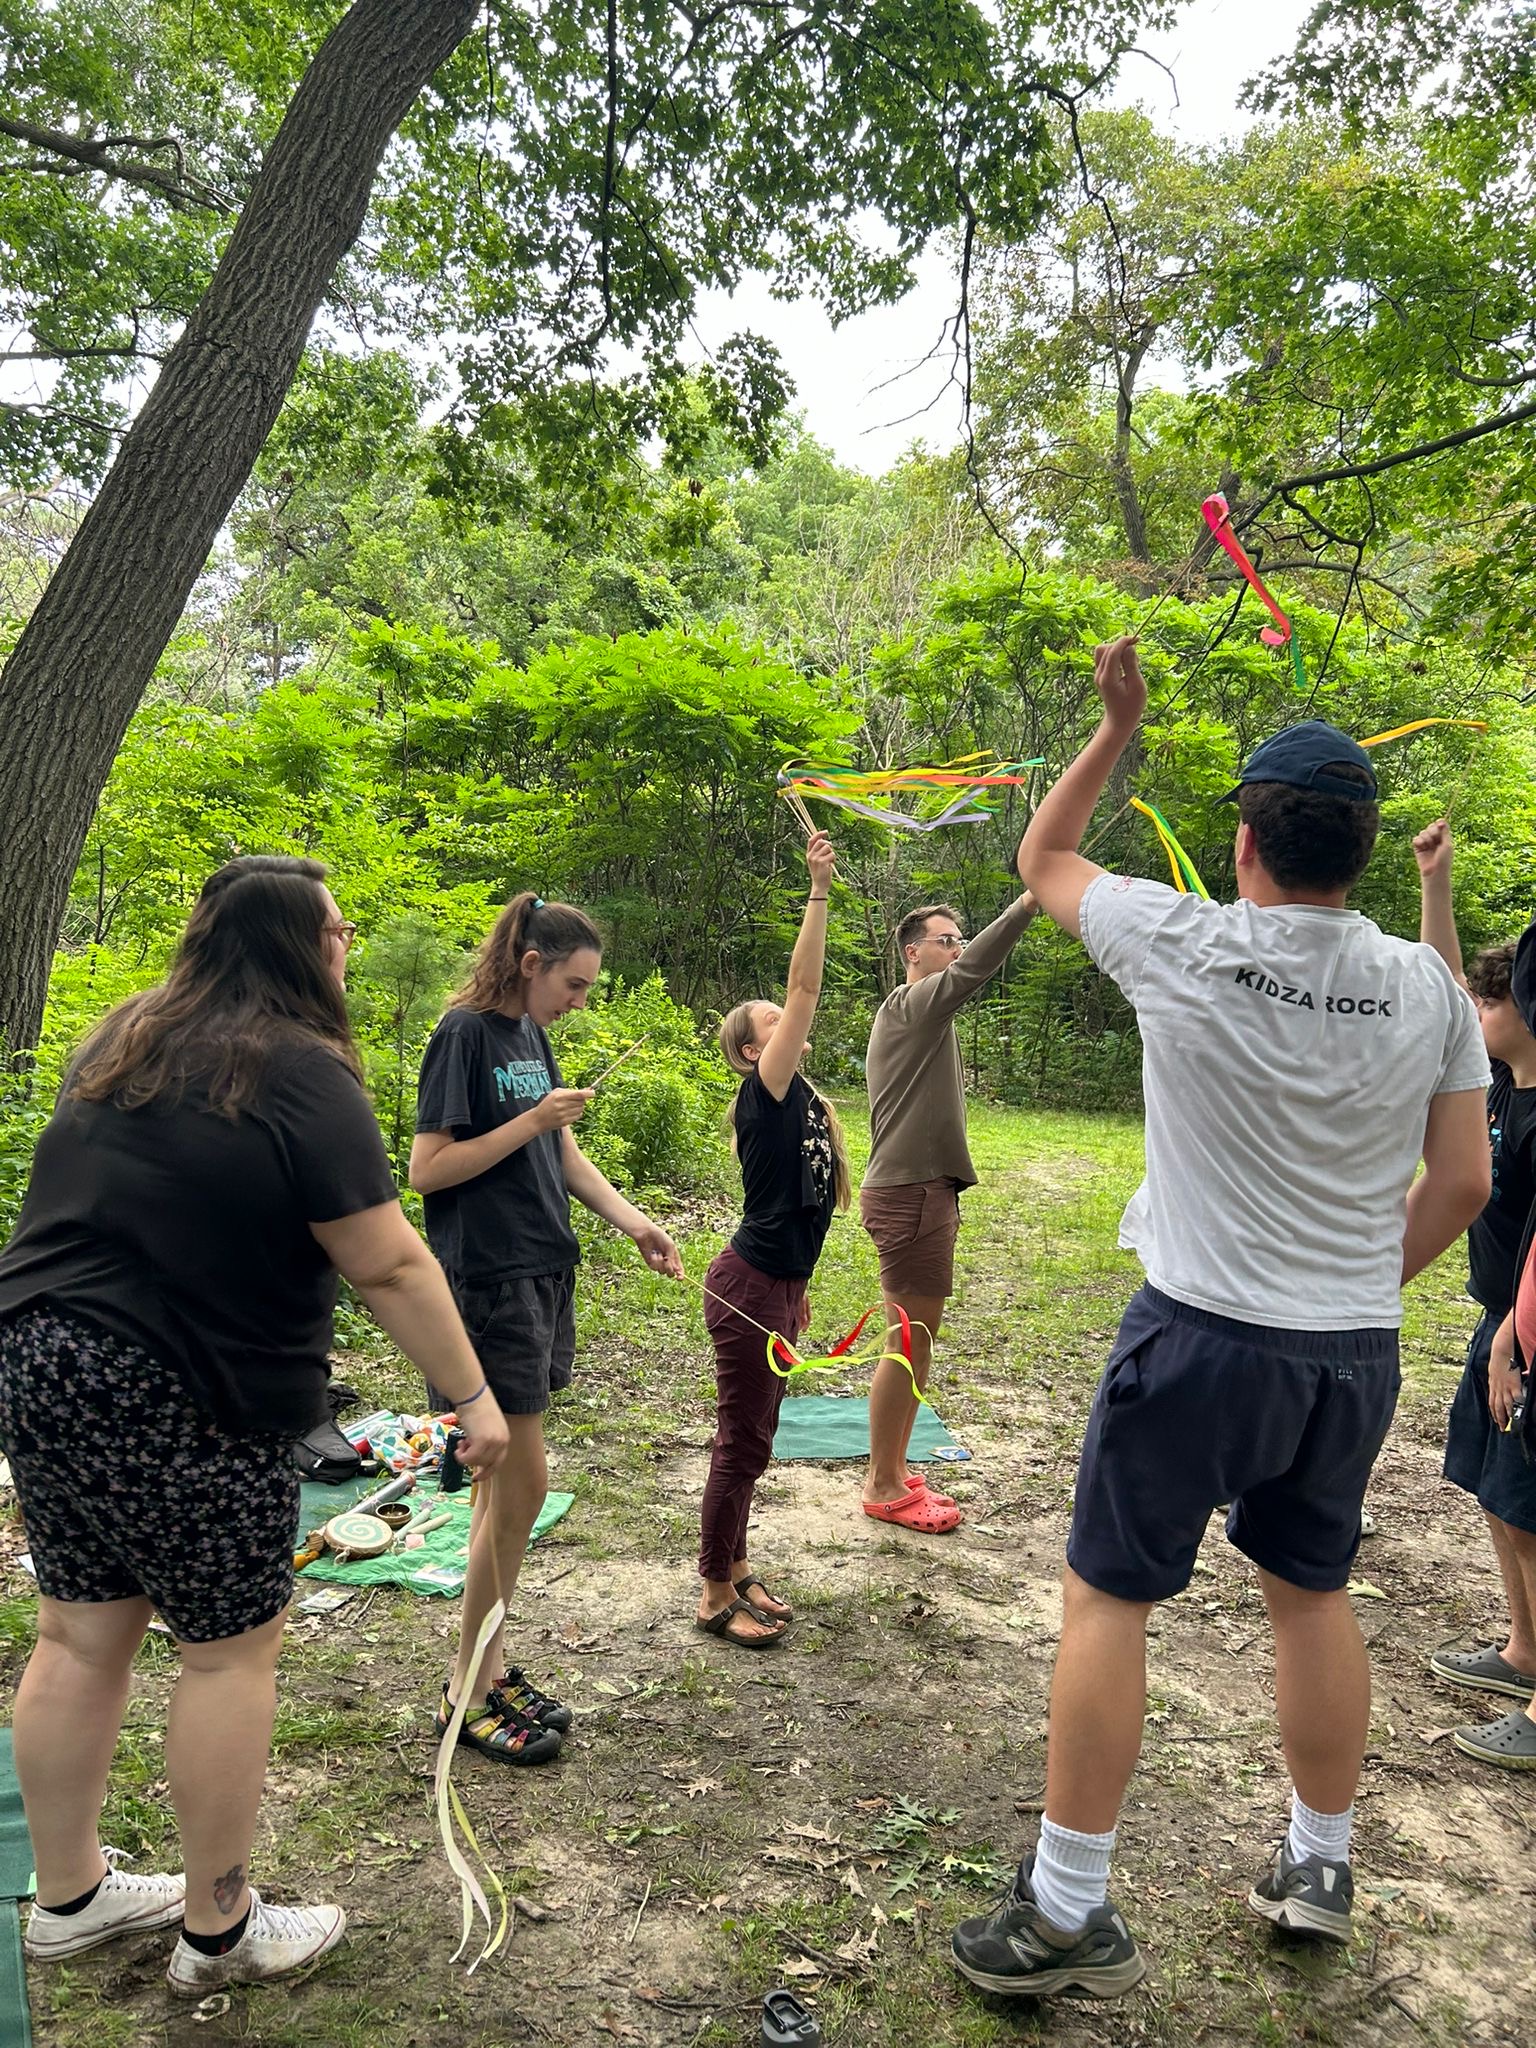 a group of people playing with a kite in the woods